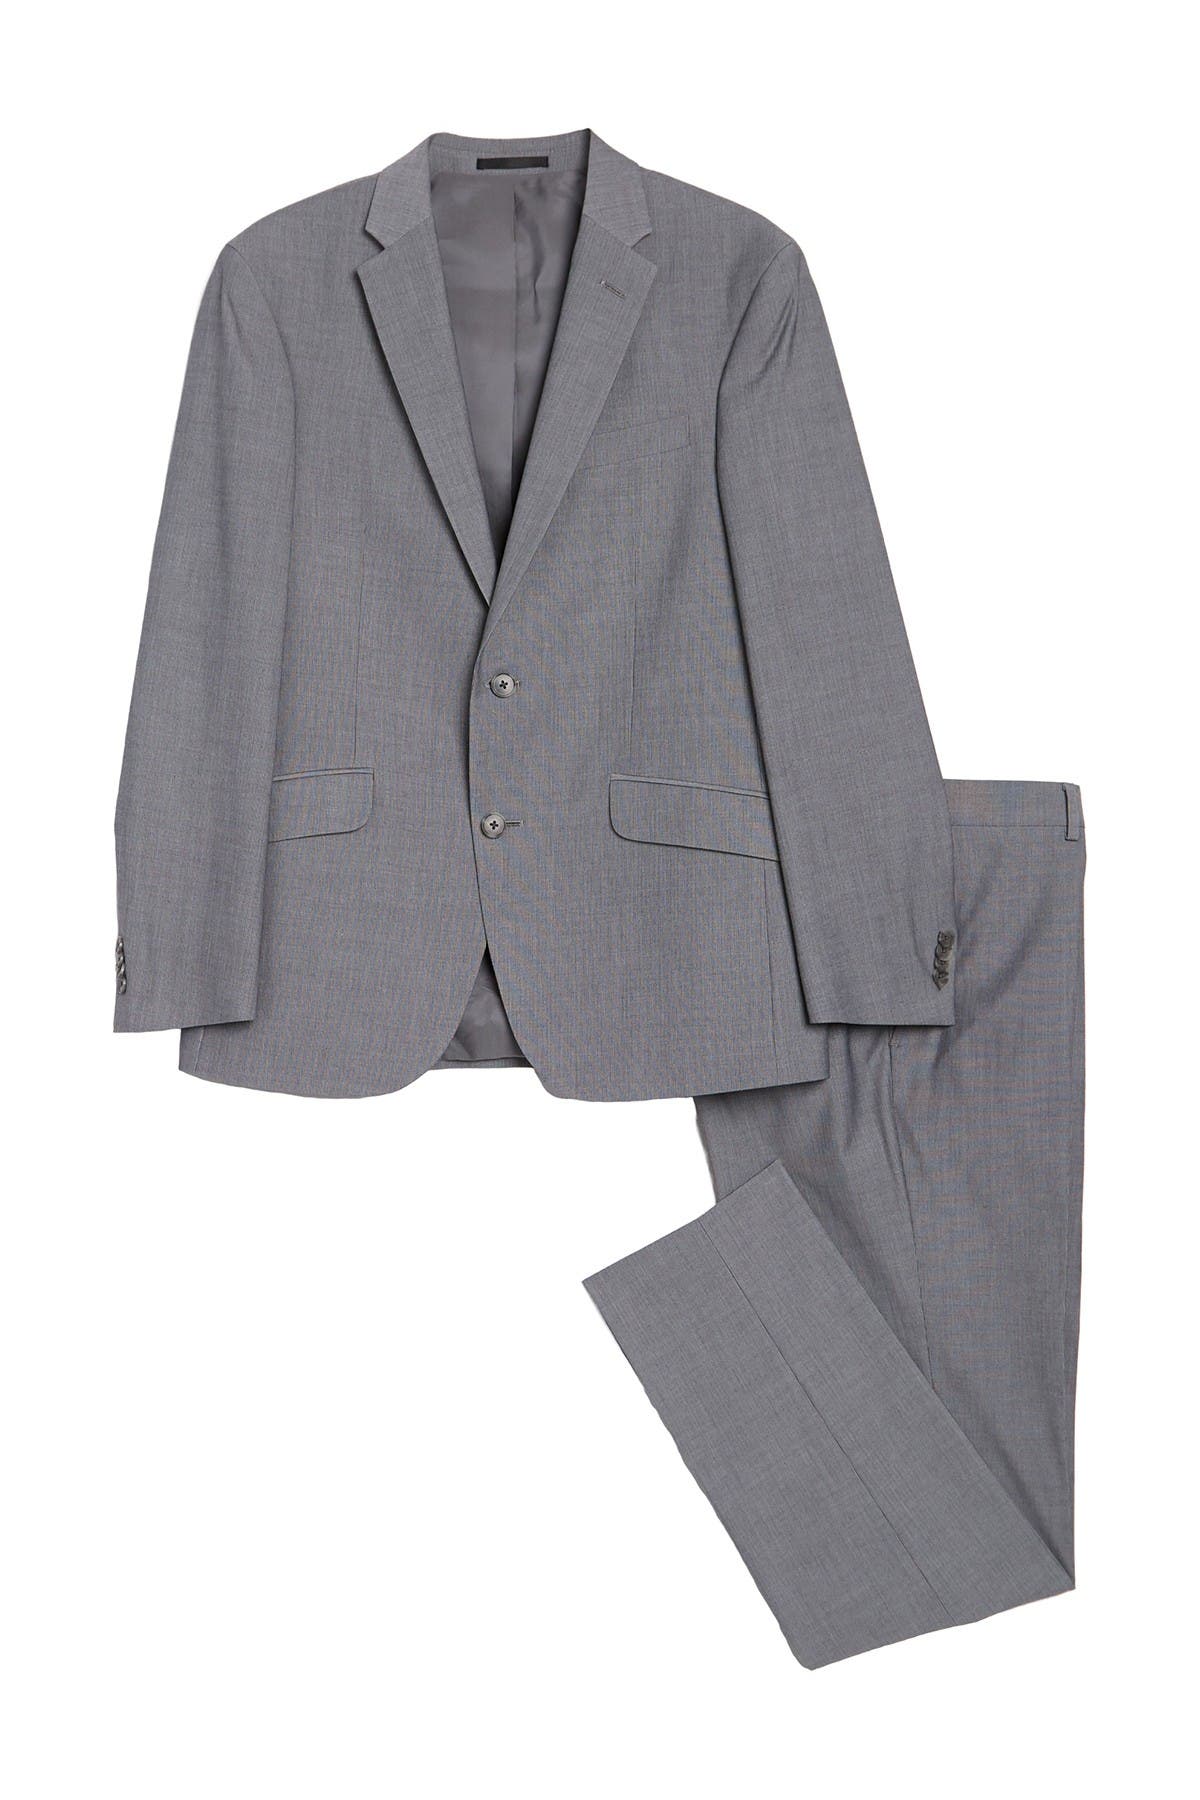 Kenneth Cole Reaction Grey Check Two Button Notch Lapel Slim Fit Suit In Medium Grey1